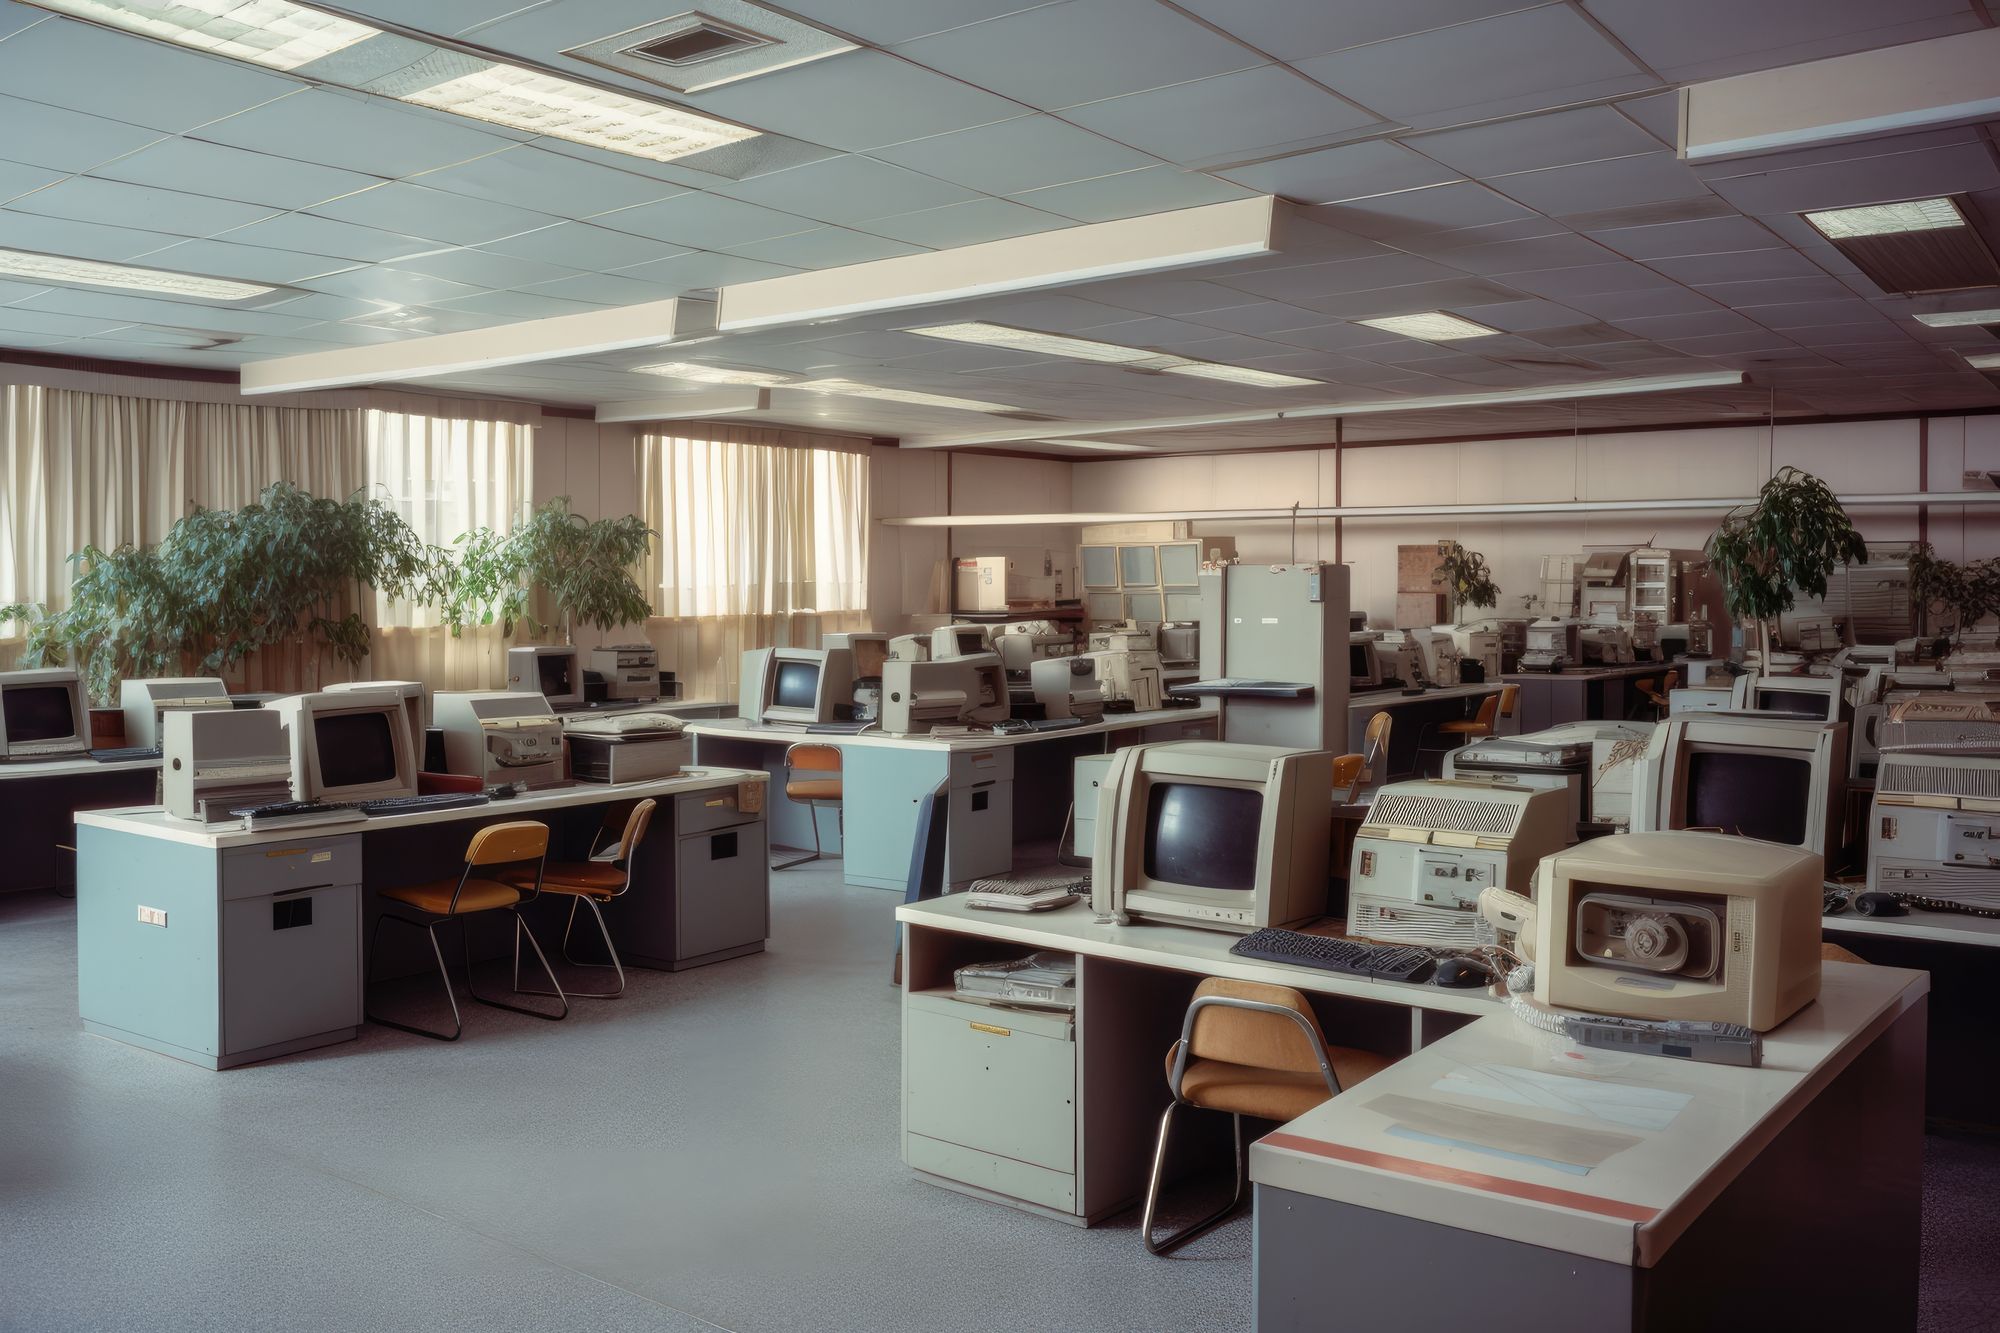 1980s style office interior with vintage computers, desks and plants.  